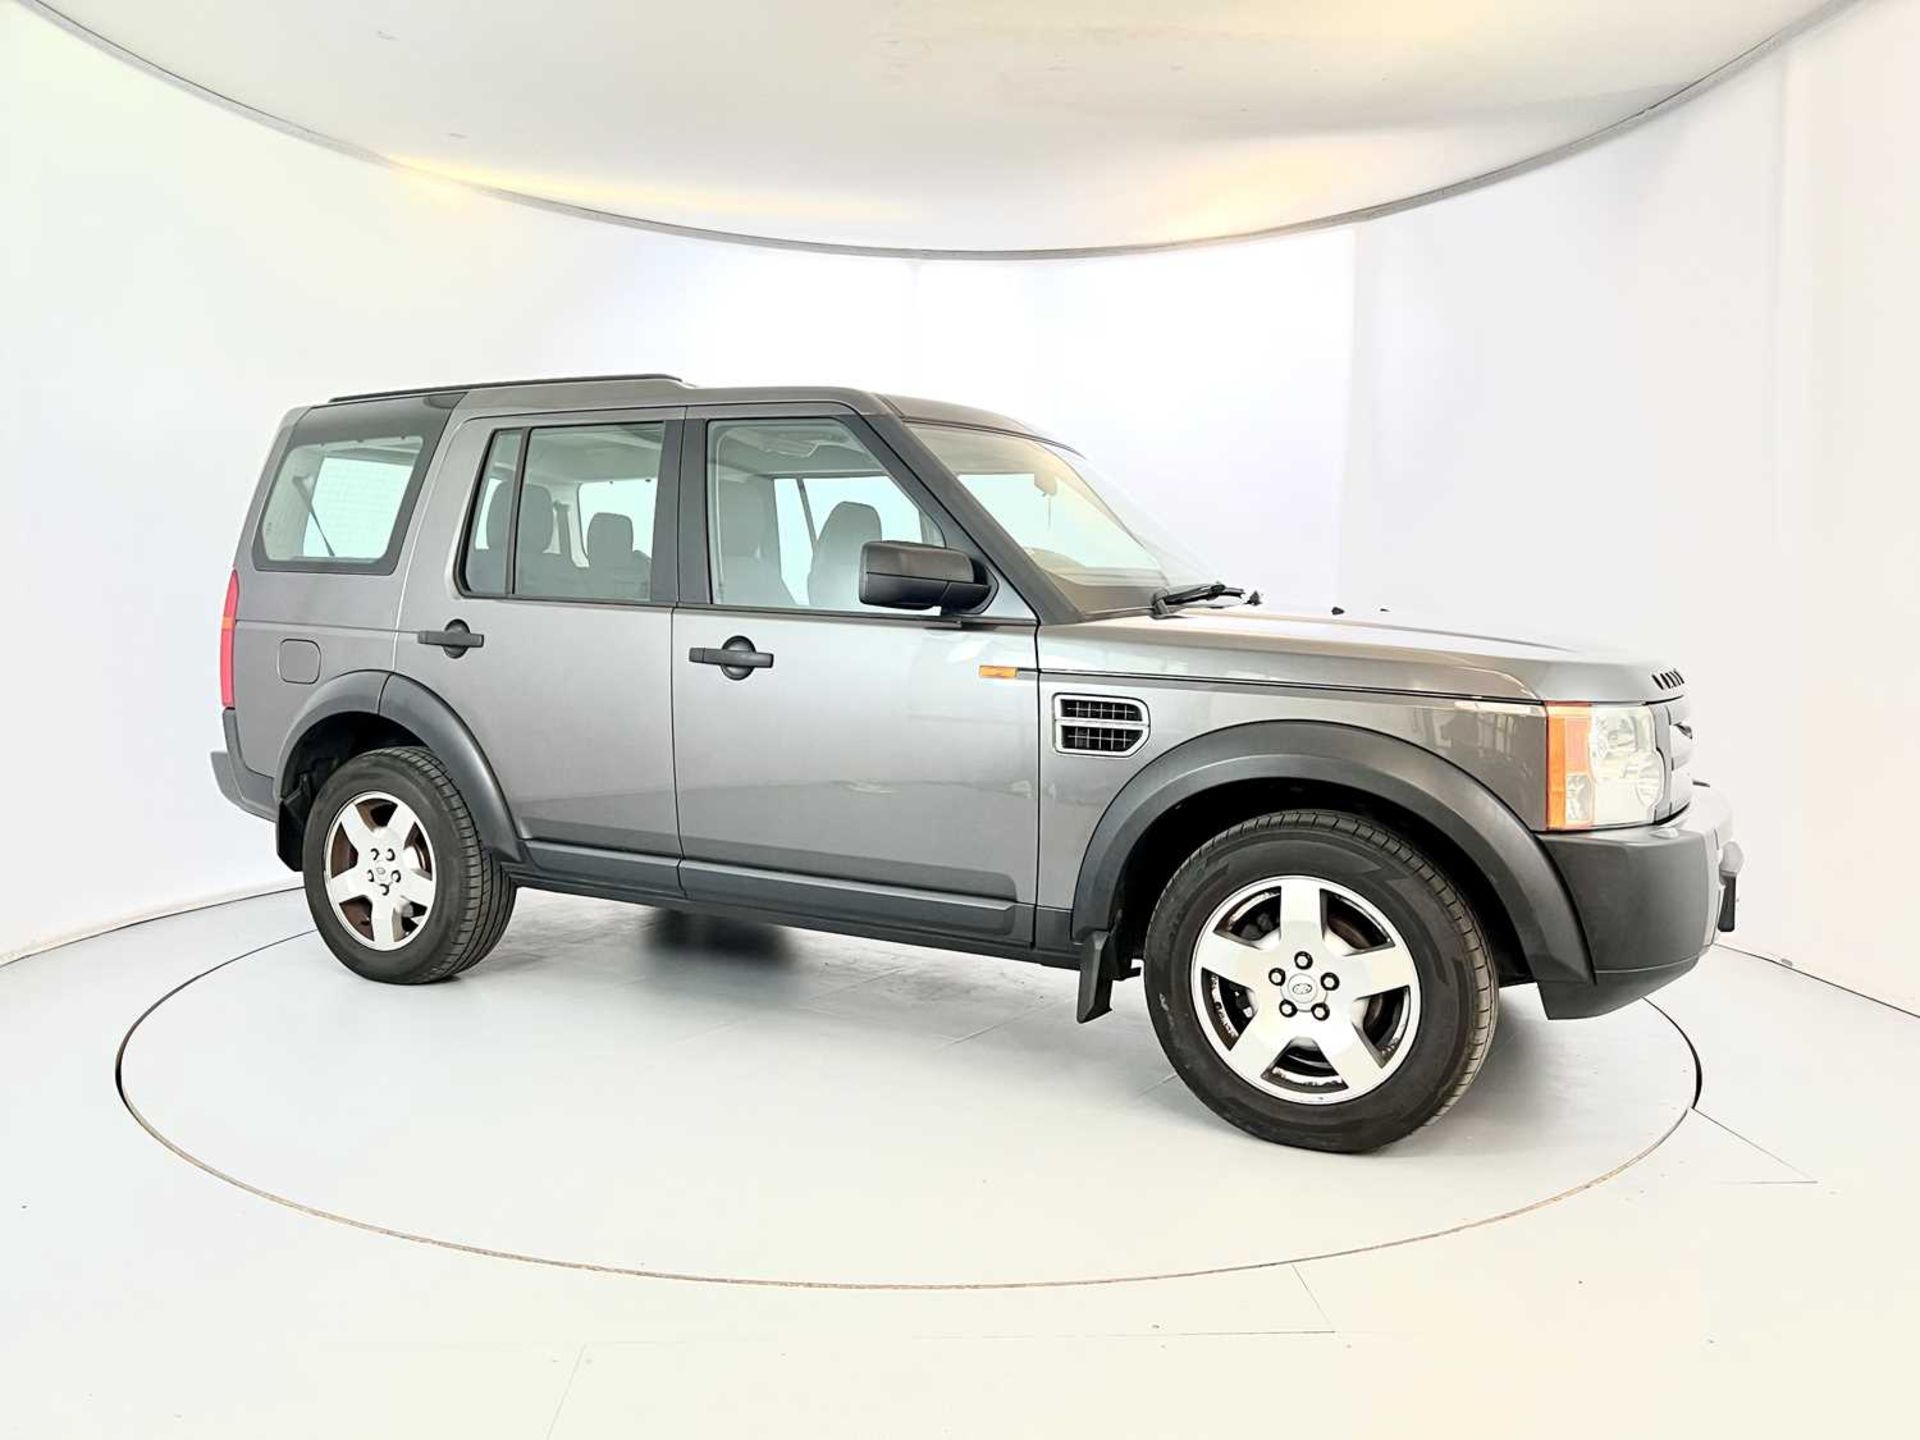 2005 Land Rover Discovery - Image 12 of 36